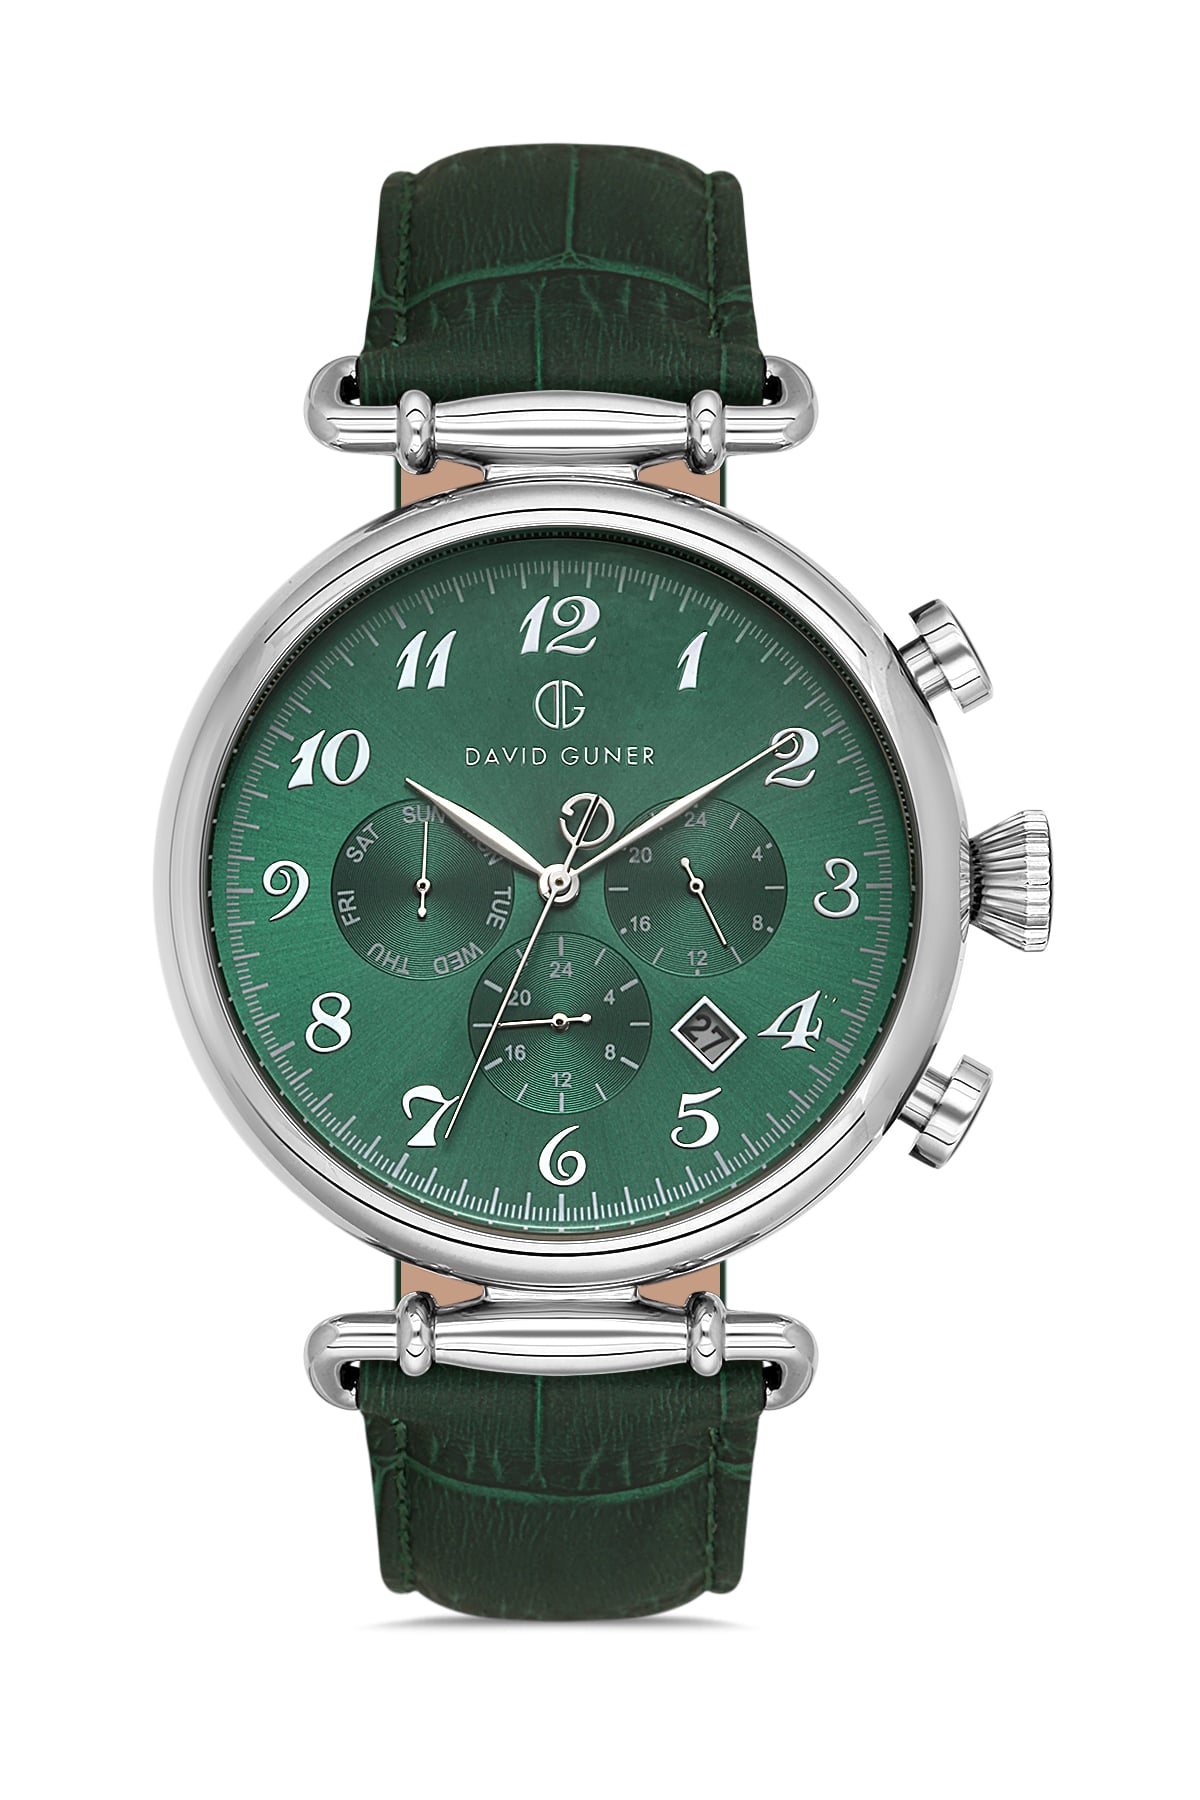 DAVID GUNER Silver Plated Green Dial Men's Wristwatch with Leather Strap